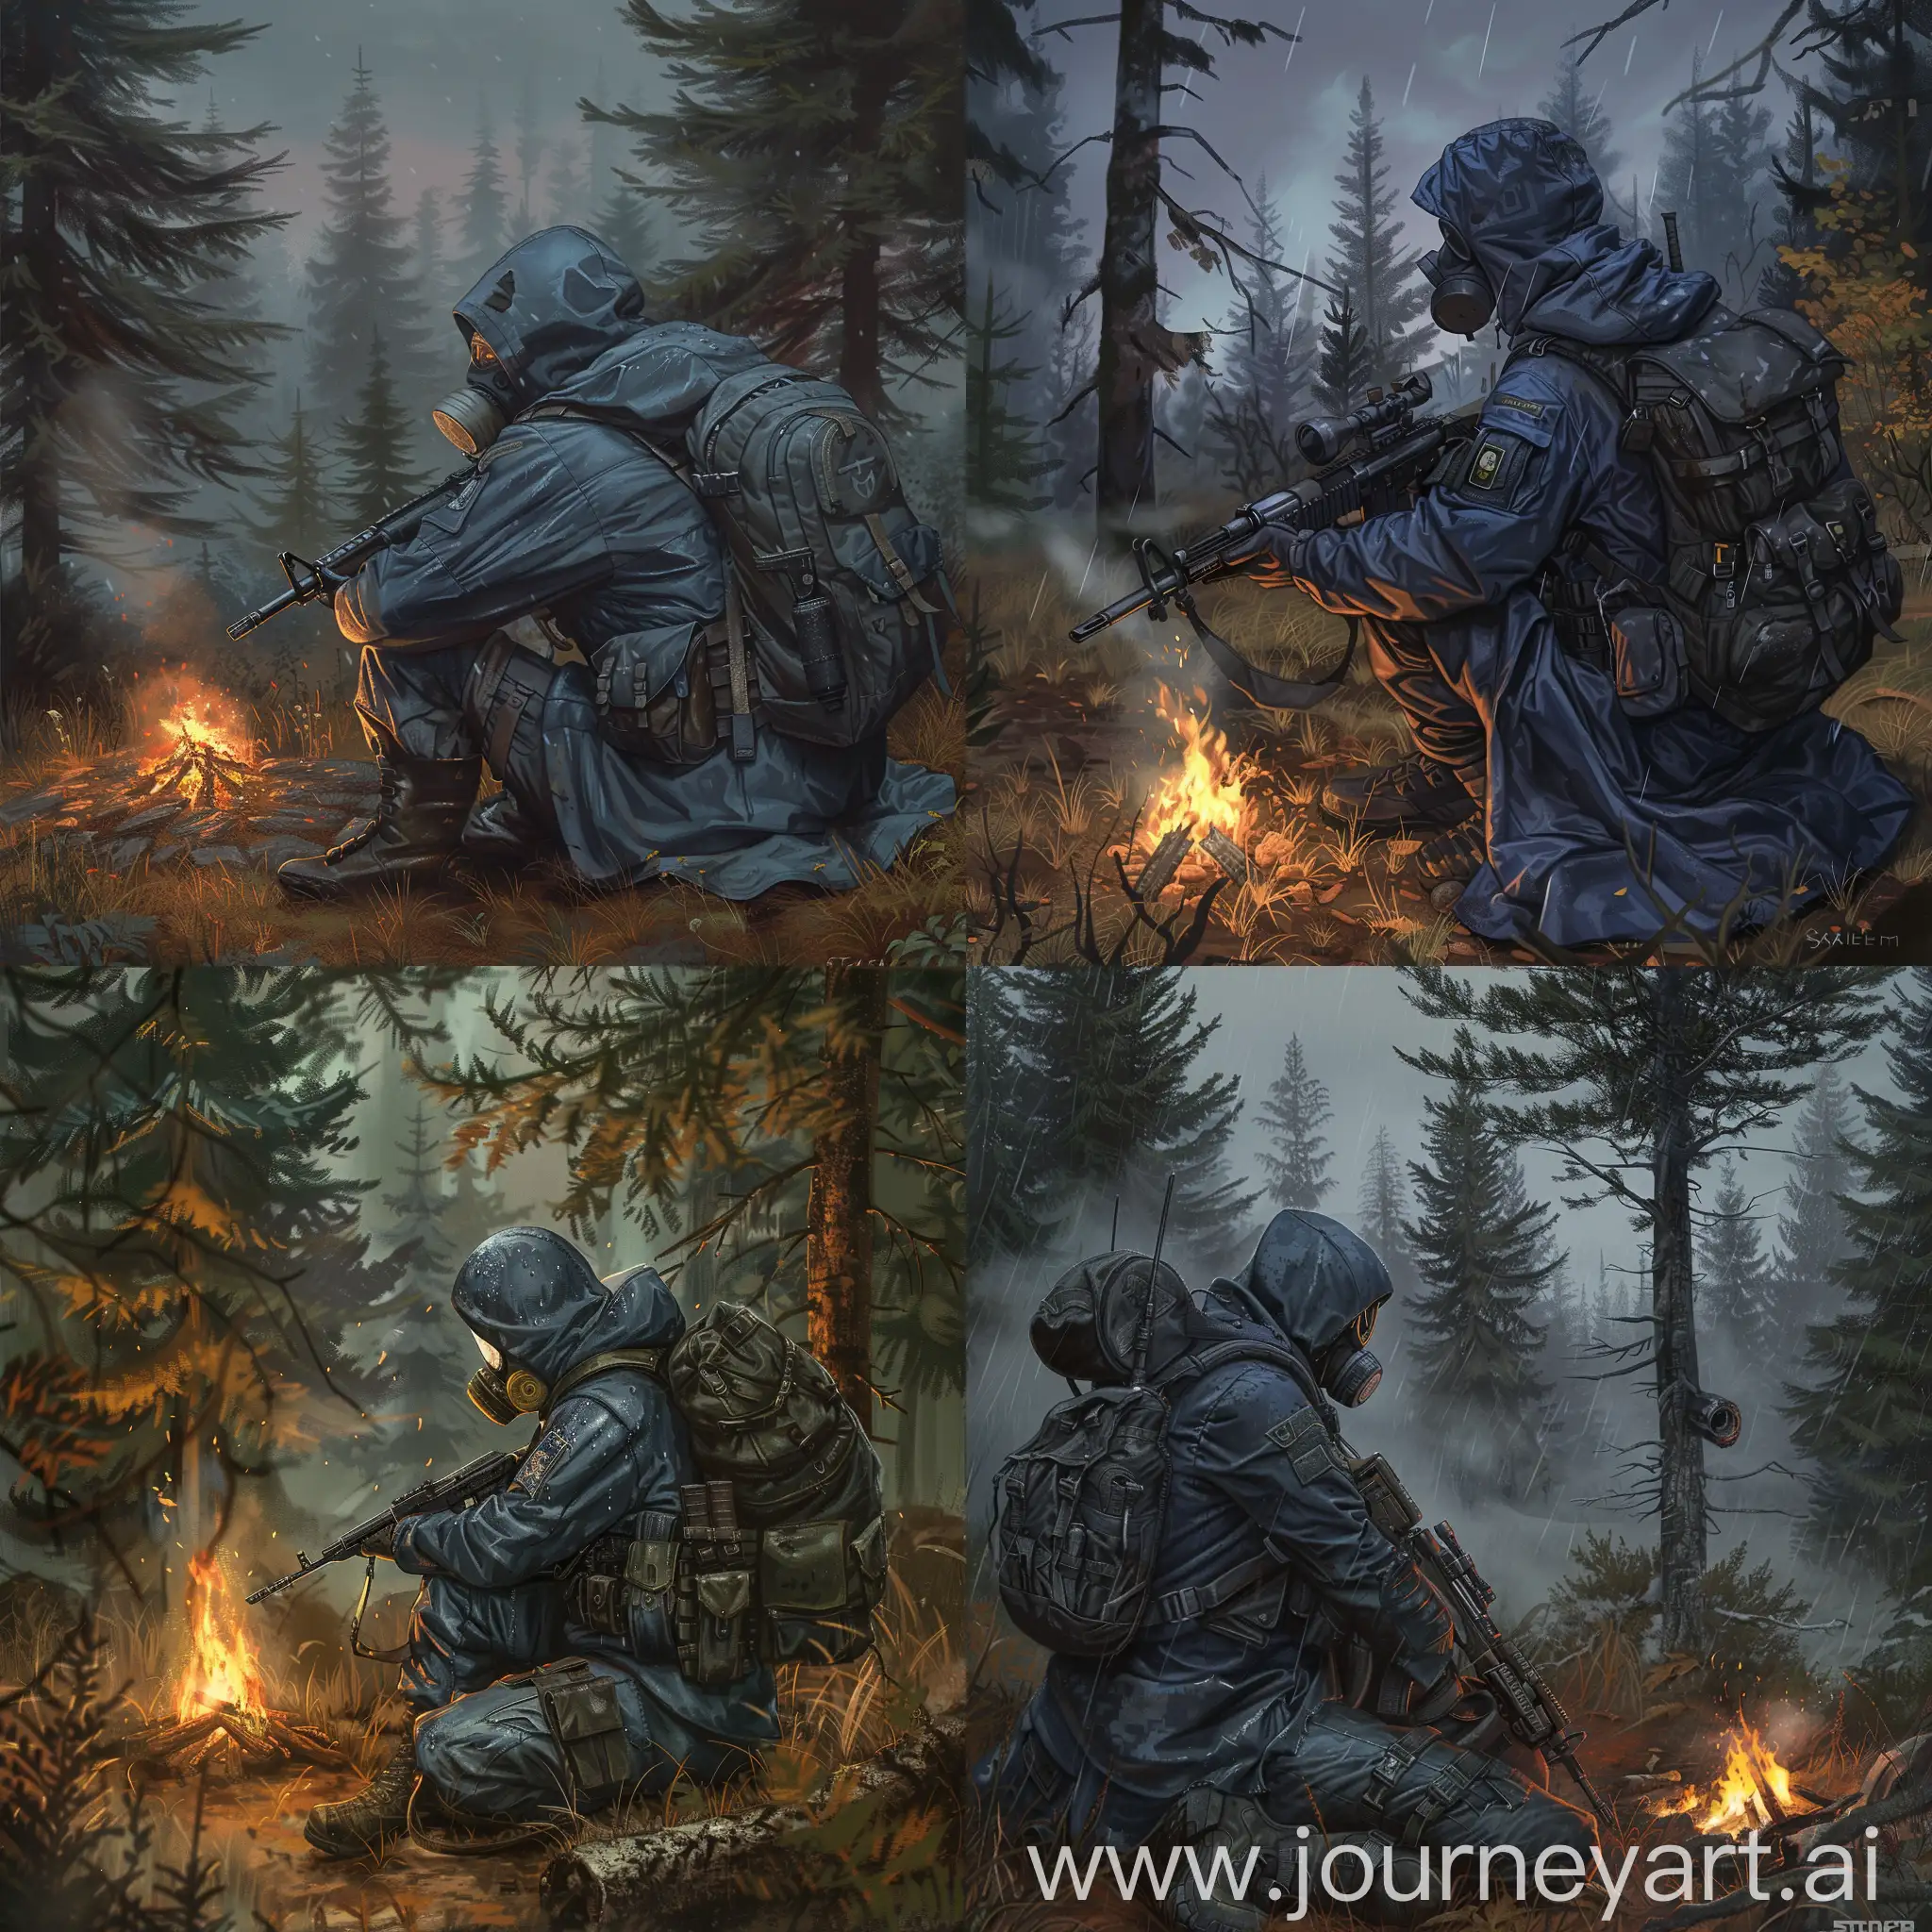 Digital art is a lone mercenary from the universe of S.T.A.L.K.E.R., dressed in a dark blue military raincoat, gray military armor on his body, gasmask on his face, a military backpack on his back, a rifle in his hands, sitting by the campfire in a pine forest, gloomy autumn.